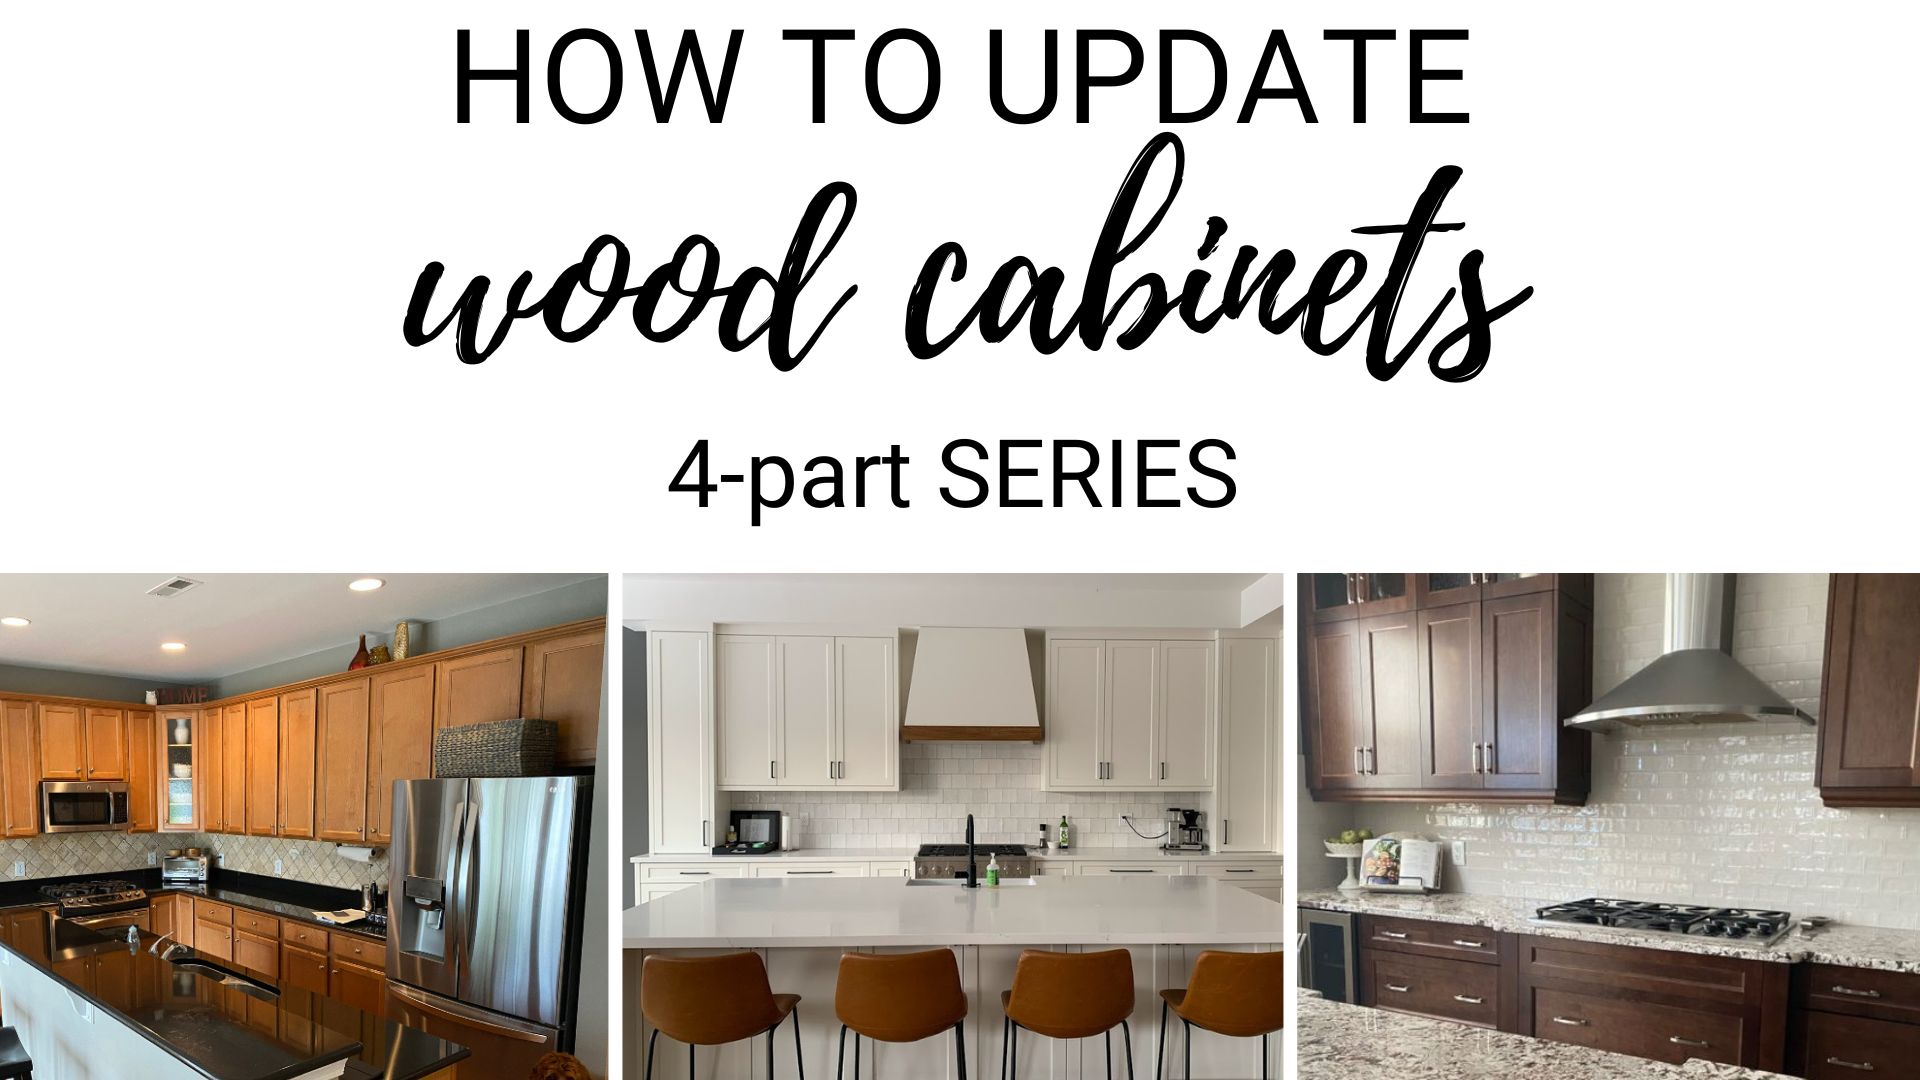 ideas to update wood, maple, oak, cherry cabinets, trim or flooring with colors, backsplash, hardware, home decor. Kylie M Edesign blogger (2)